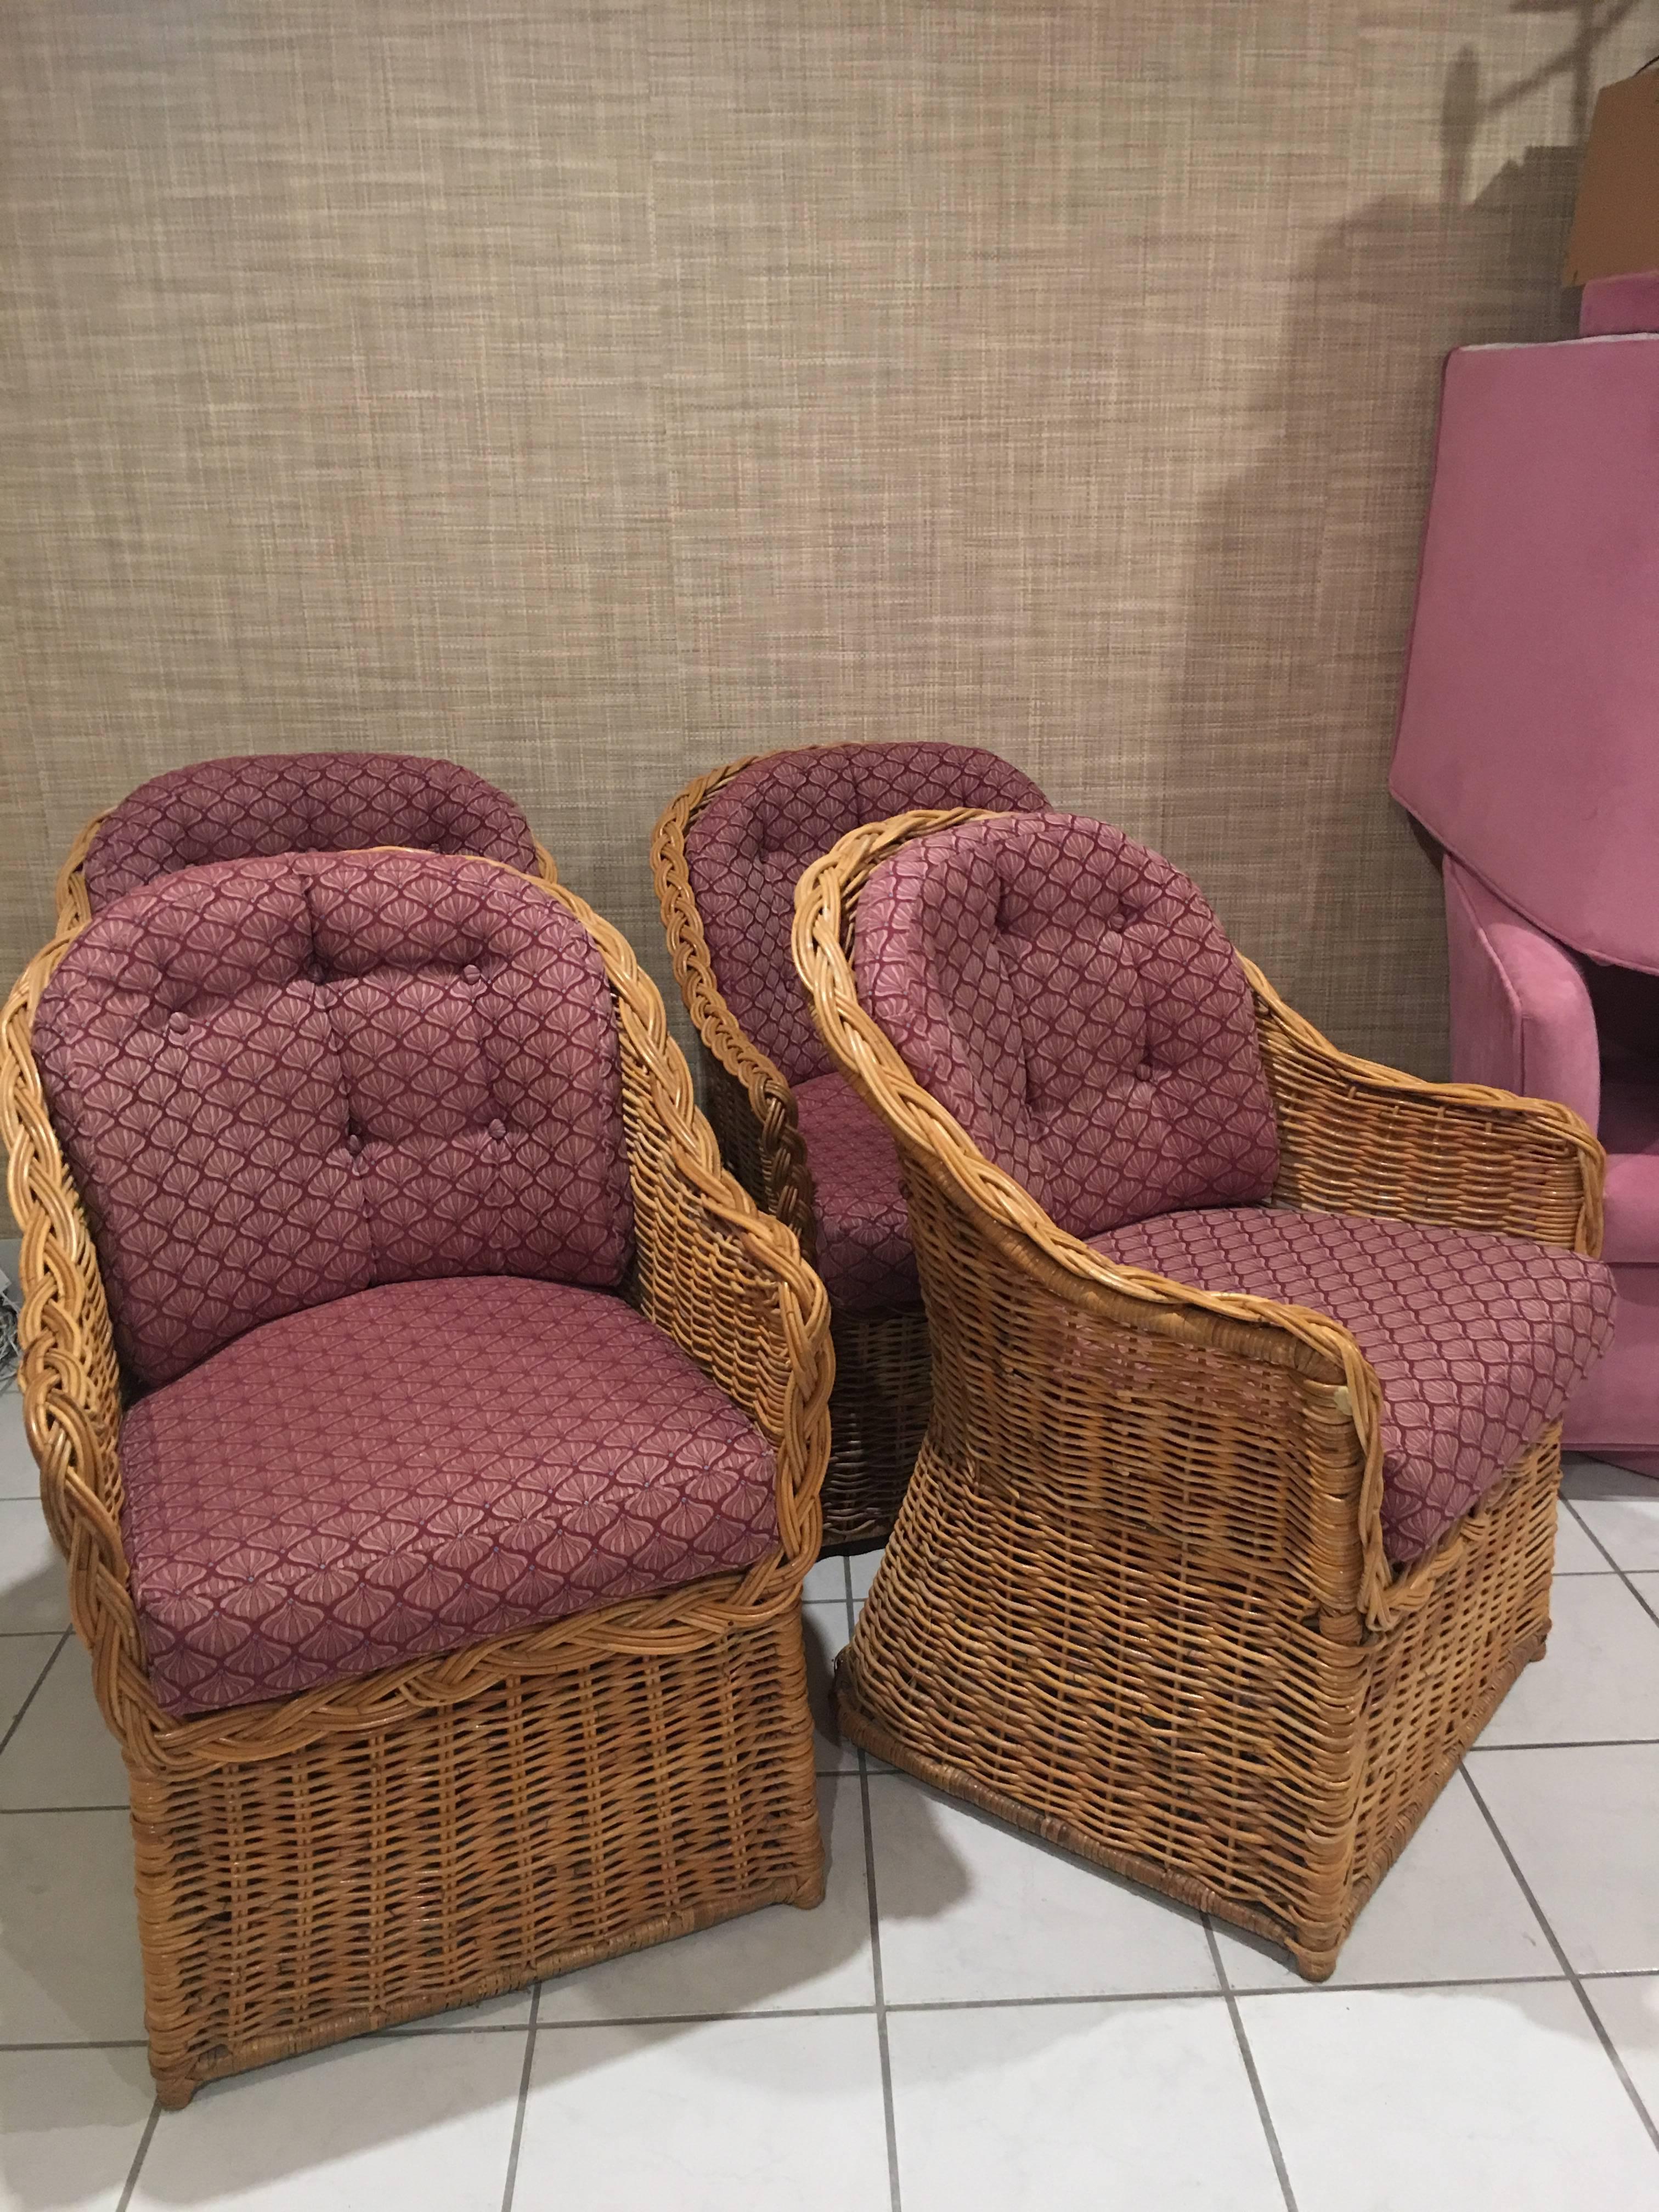 Set of four vintage braided rattan, wicker dining arm chairs. The cushions are removable to expose all the rattan. The cushions are original but have no flaws. Depth below is cushion depth.